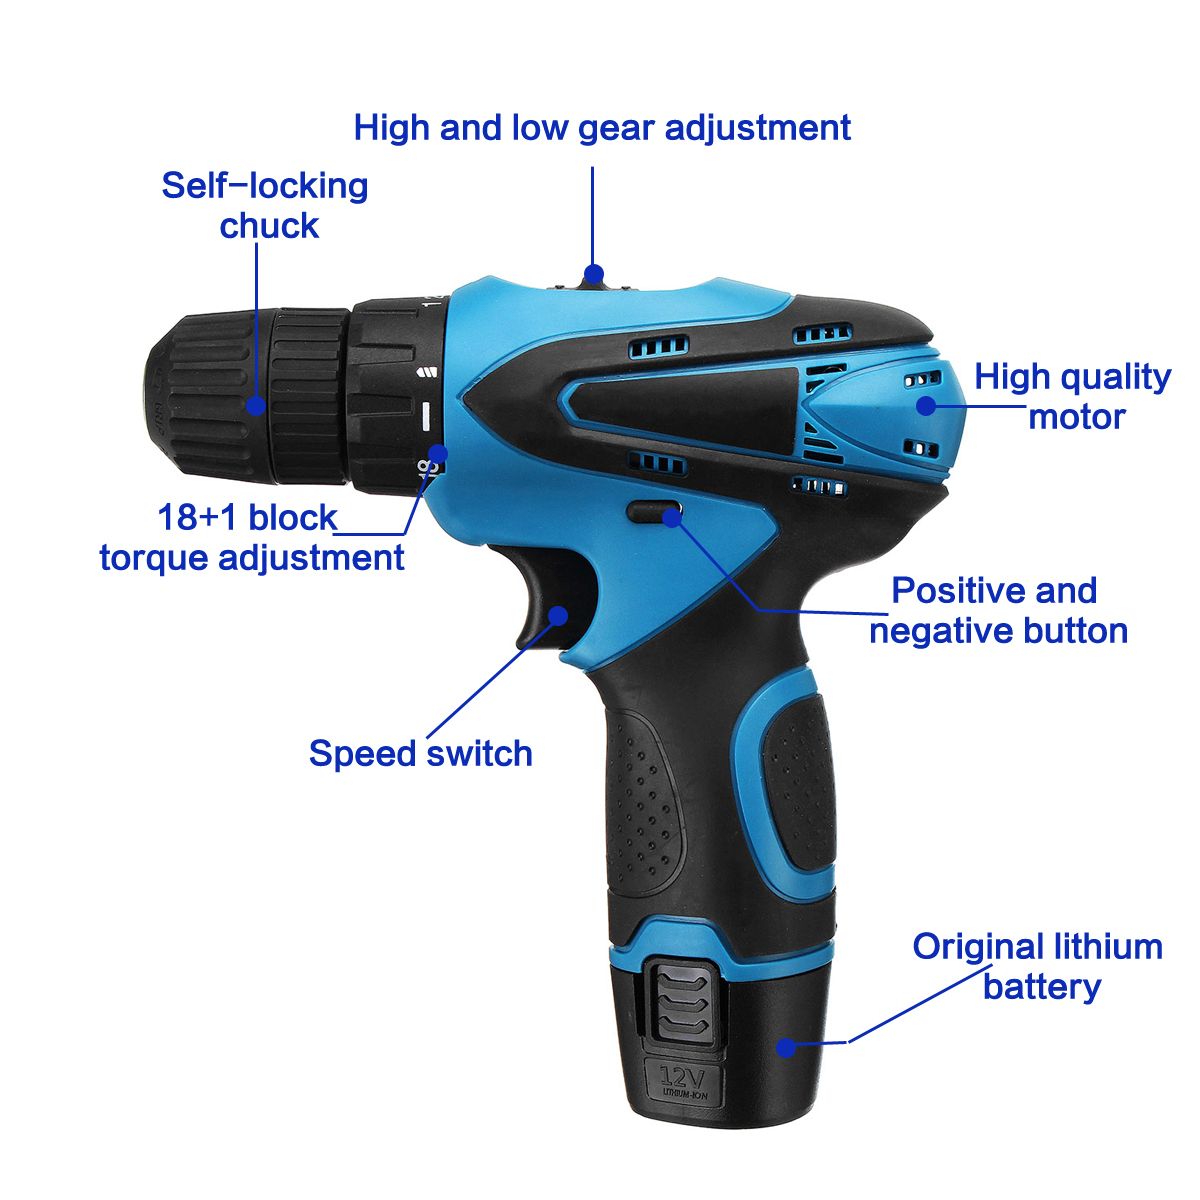 21V12V-1350RPM-Electric-Drill-Power-Screwdriver-Lithium-Batteries-Chargeable-Repair-Tools-Kit-1399408